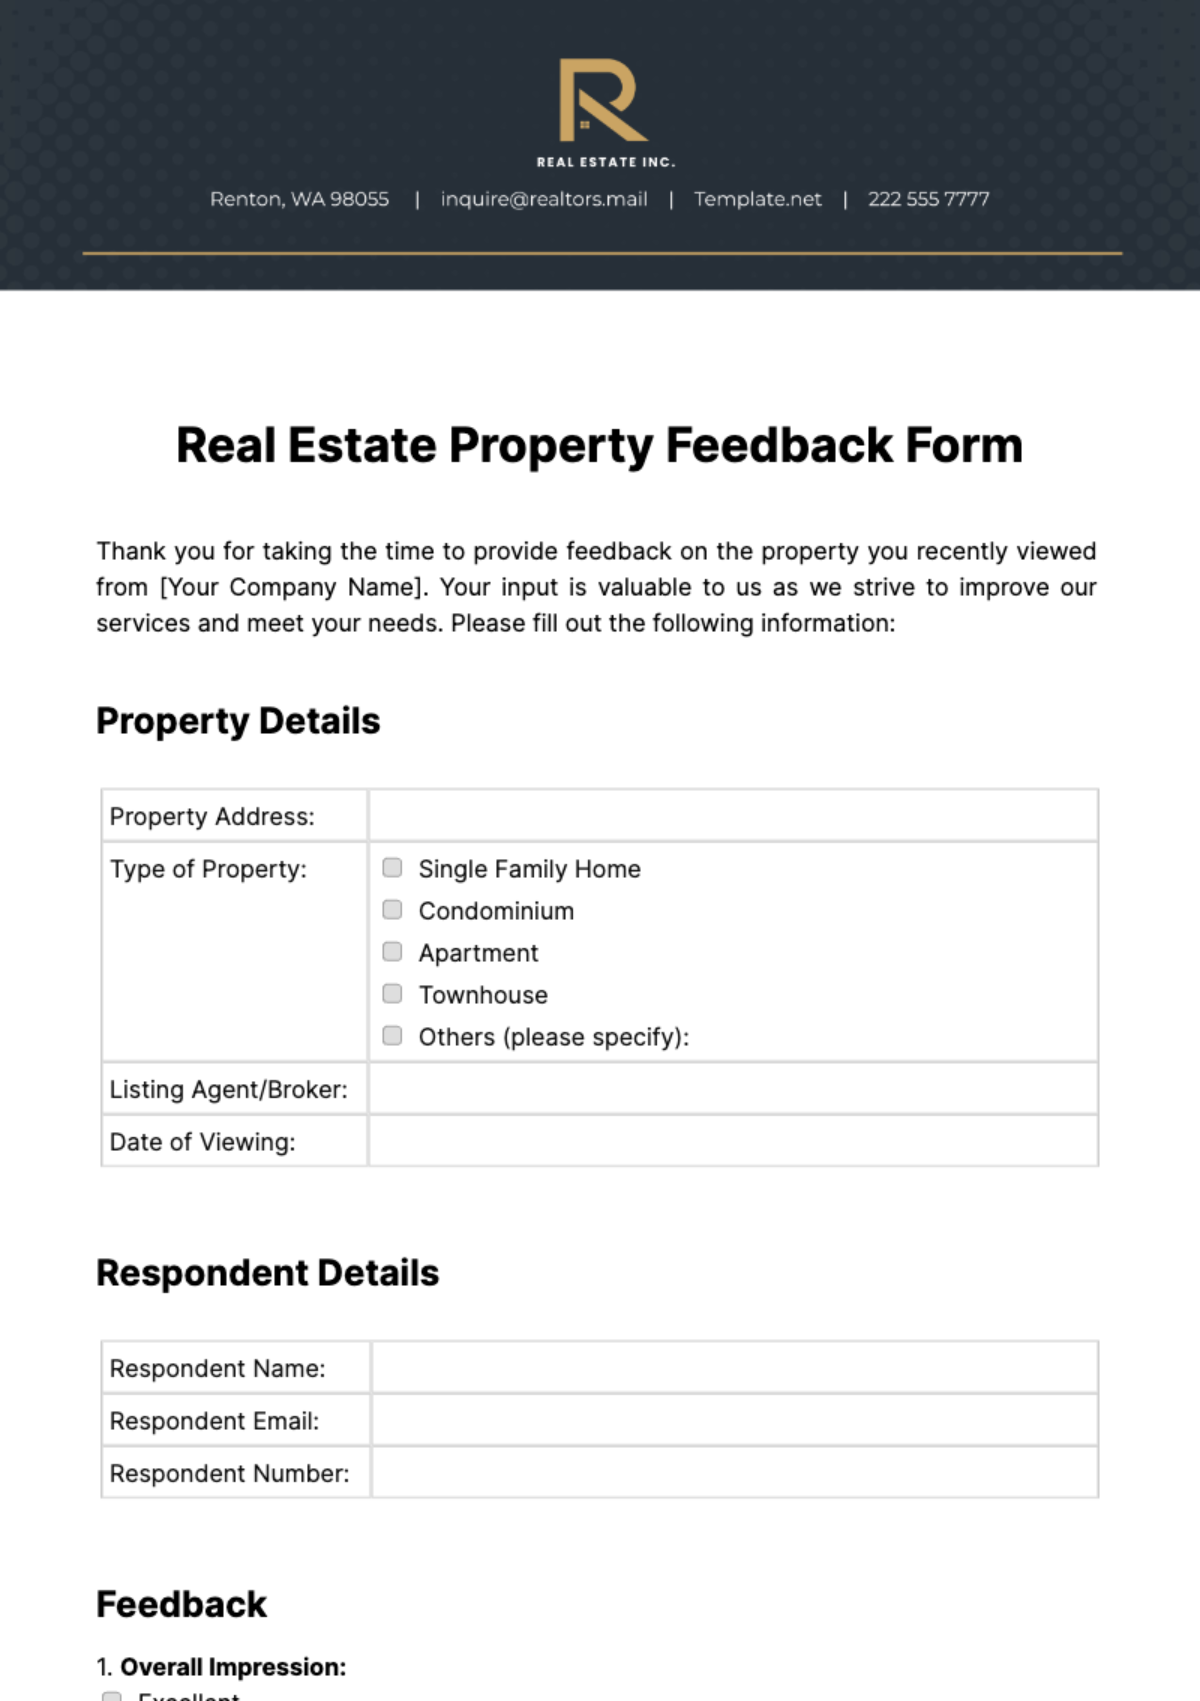 Real Estate Property Feedback Form Template